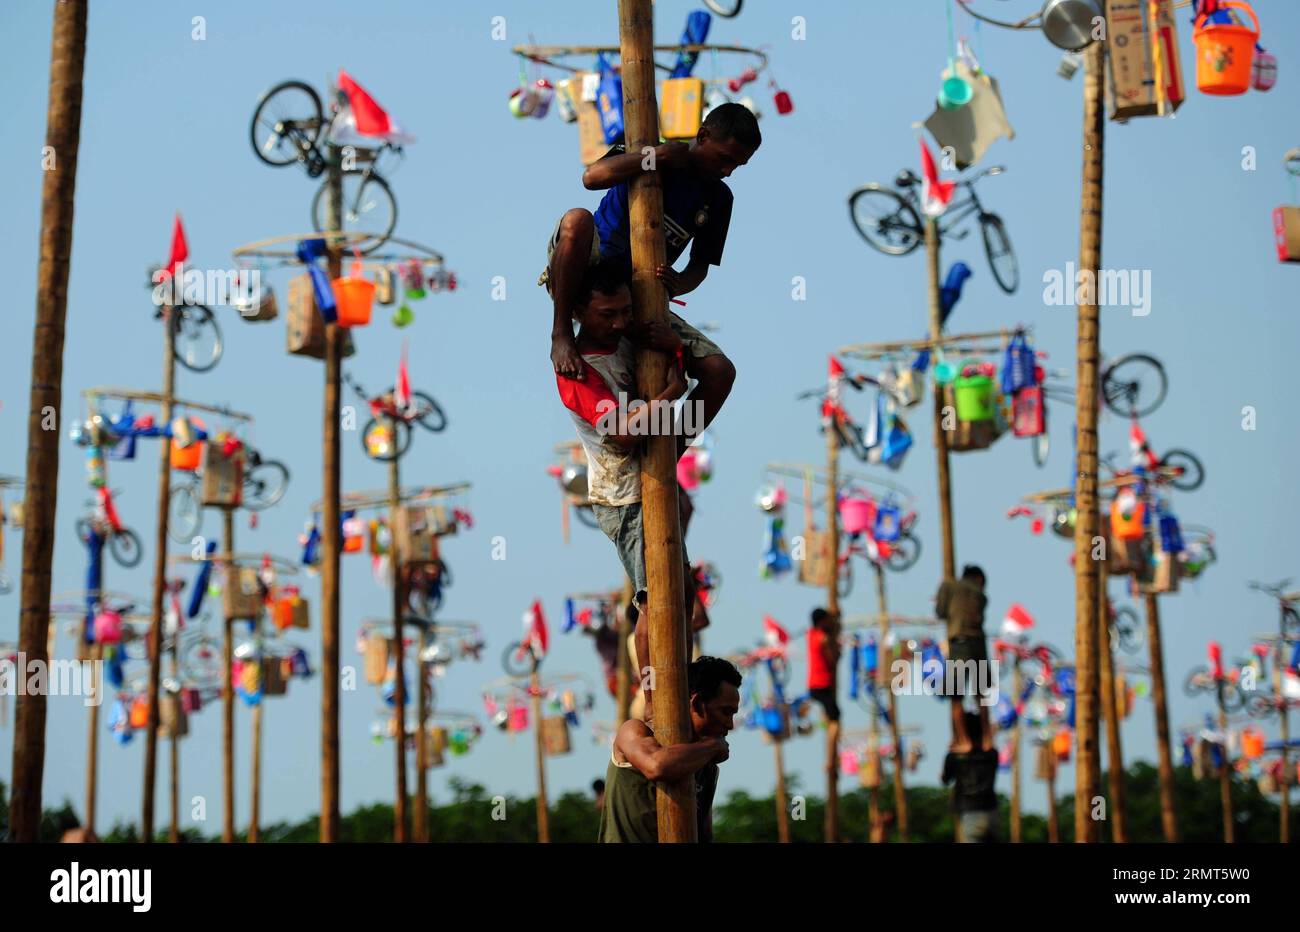 (140817) -- JAKARTA, Aug. 17, 2014 -- Indonesian men participate in a greased-pole climbing competition as a part of the Independence Day celebrations on Ancol beach in Jakarta, Indonesia, Aug. 17, 2014. Indonesia marked the 69th anniversary of its independence from Dutch rule on Sunday. ) INDONESIA-JAKARTA-INDEPENDENCE DAY-CELEBRATION Zulkarnain PUBLICATIONxNOTxINxCHN   Jakarta Aug 17 2014 Indonesian Men participate in a Greased Pole Climbing Competition As a Part of The Independence Day celebrations ON Ancol Beach in Jakarta Indonesia Aug 17 2014 Indonesia marked The 69th Anniversary of its Stock Photo